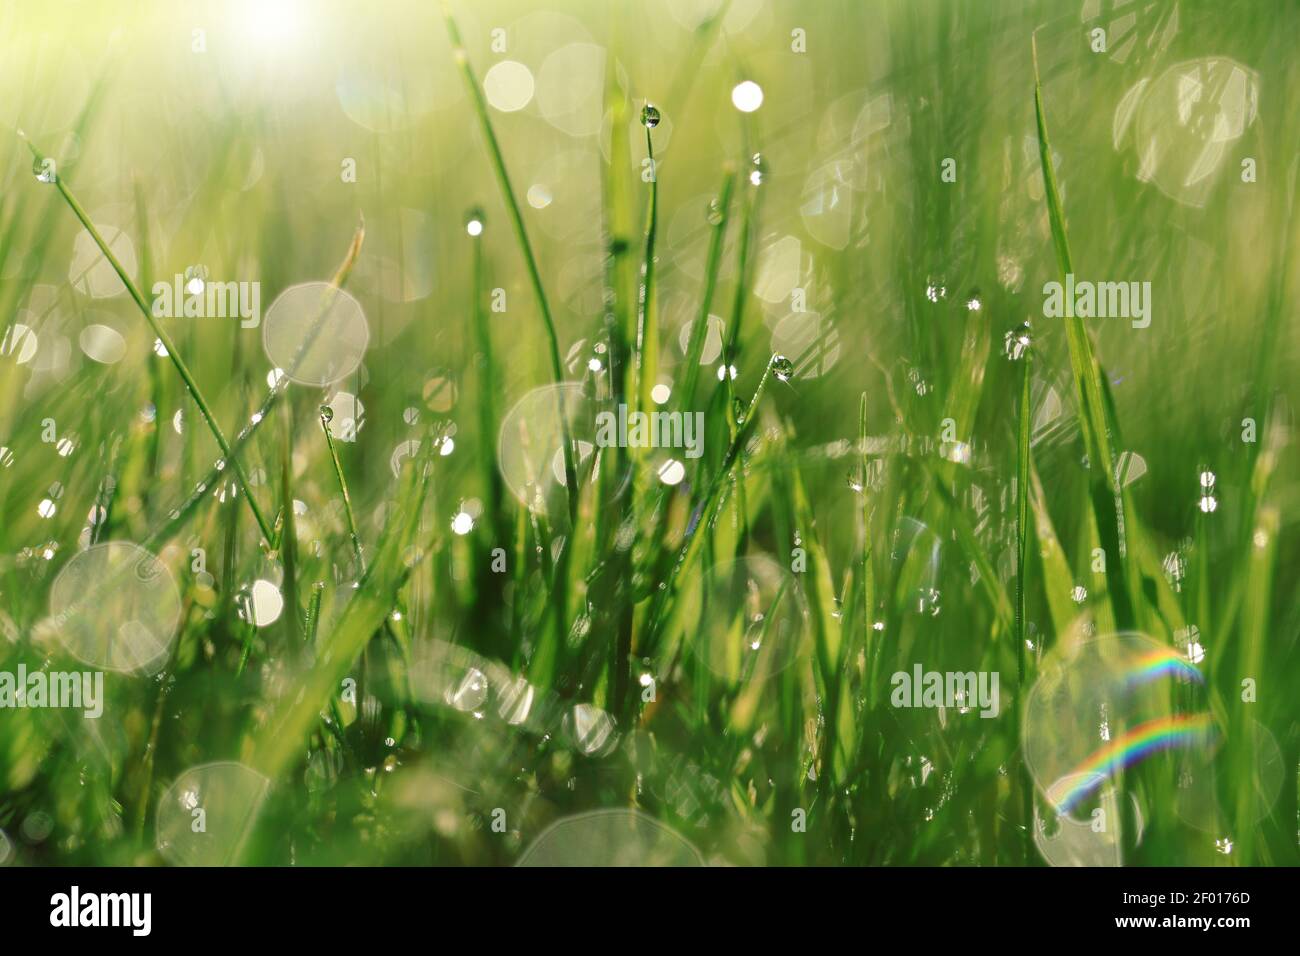 Earth Day. Ecological . Grass with water drops in the sun.spring grass background. bright green grass with water drops. natural backgrounds with green Stock Photo